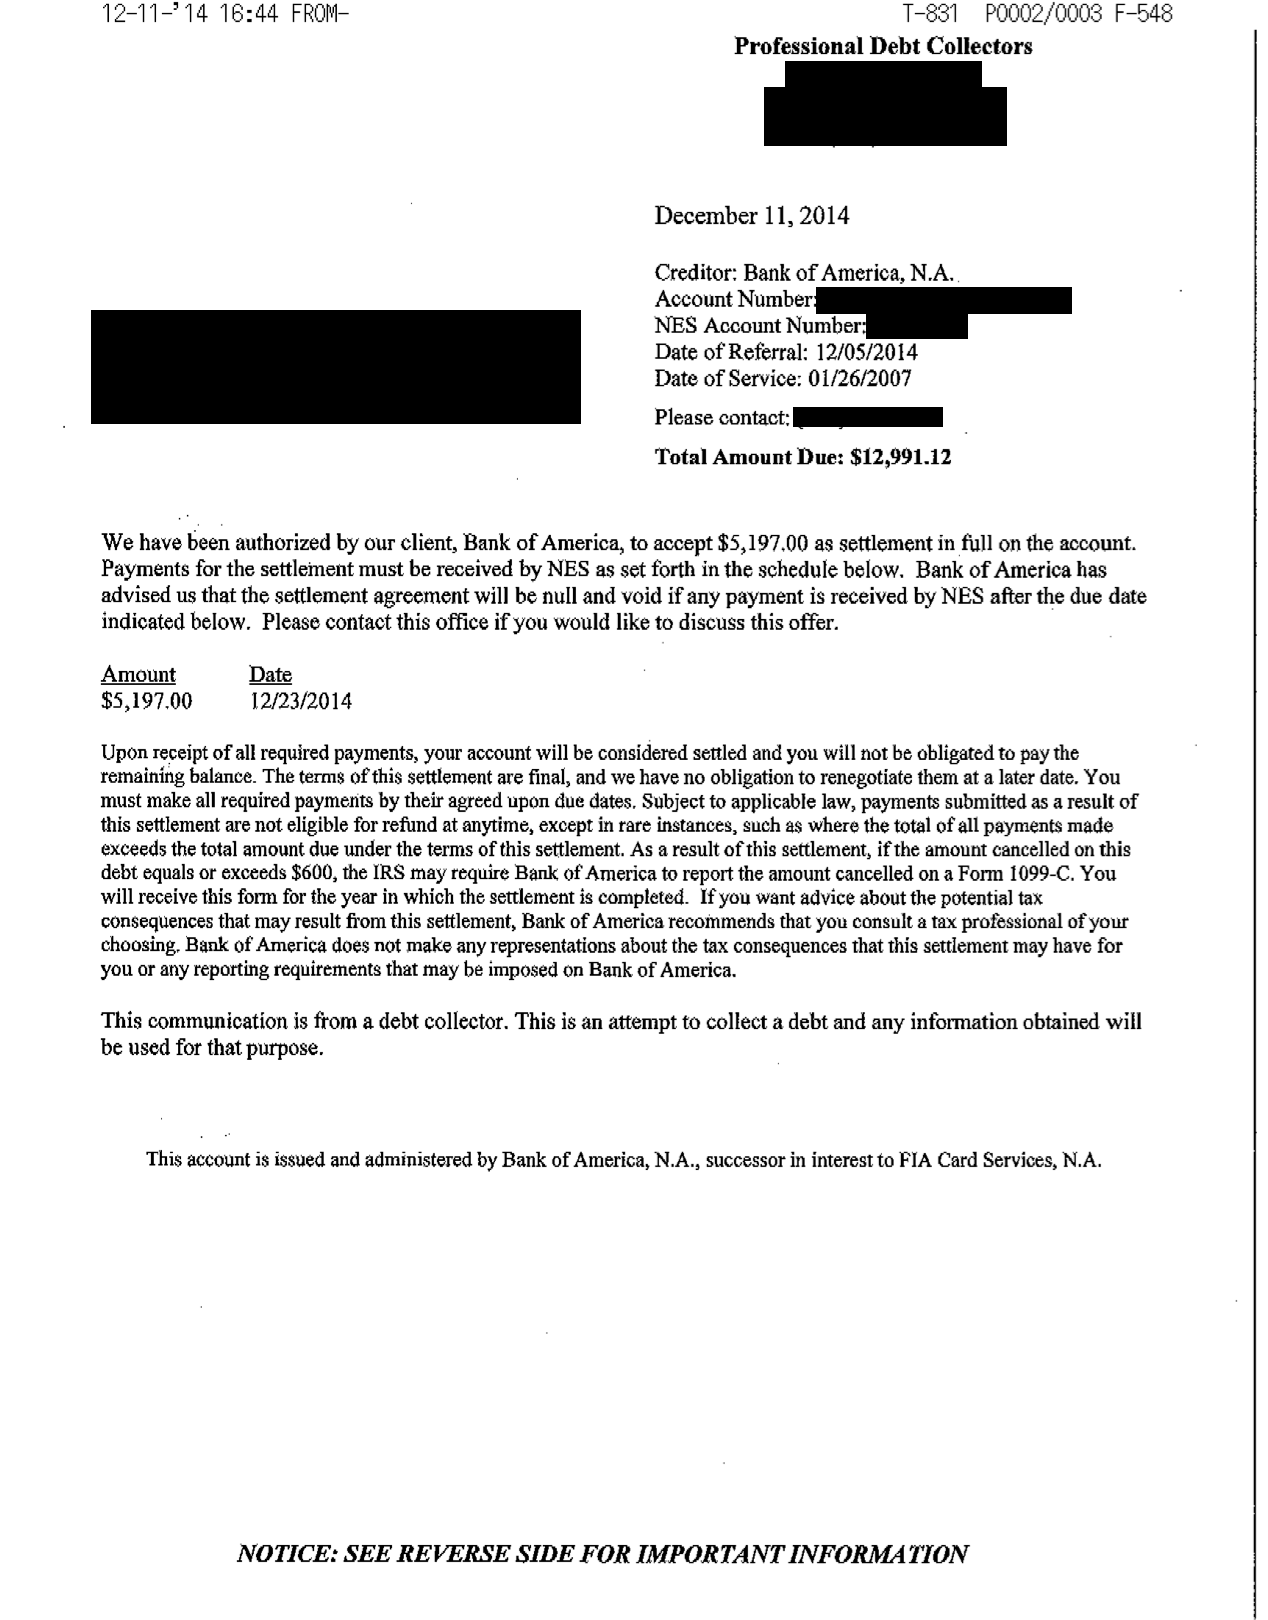 Image of a settlement letter with Bank of America with savings of 7,794 dollars